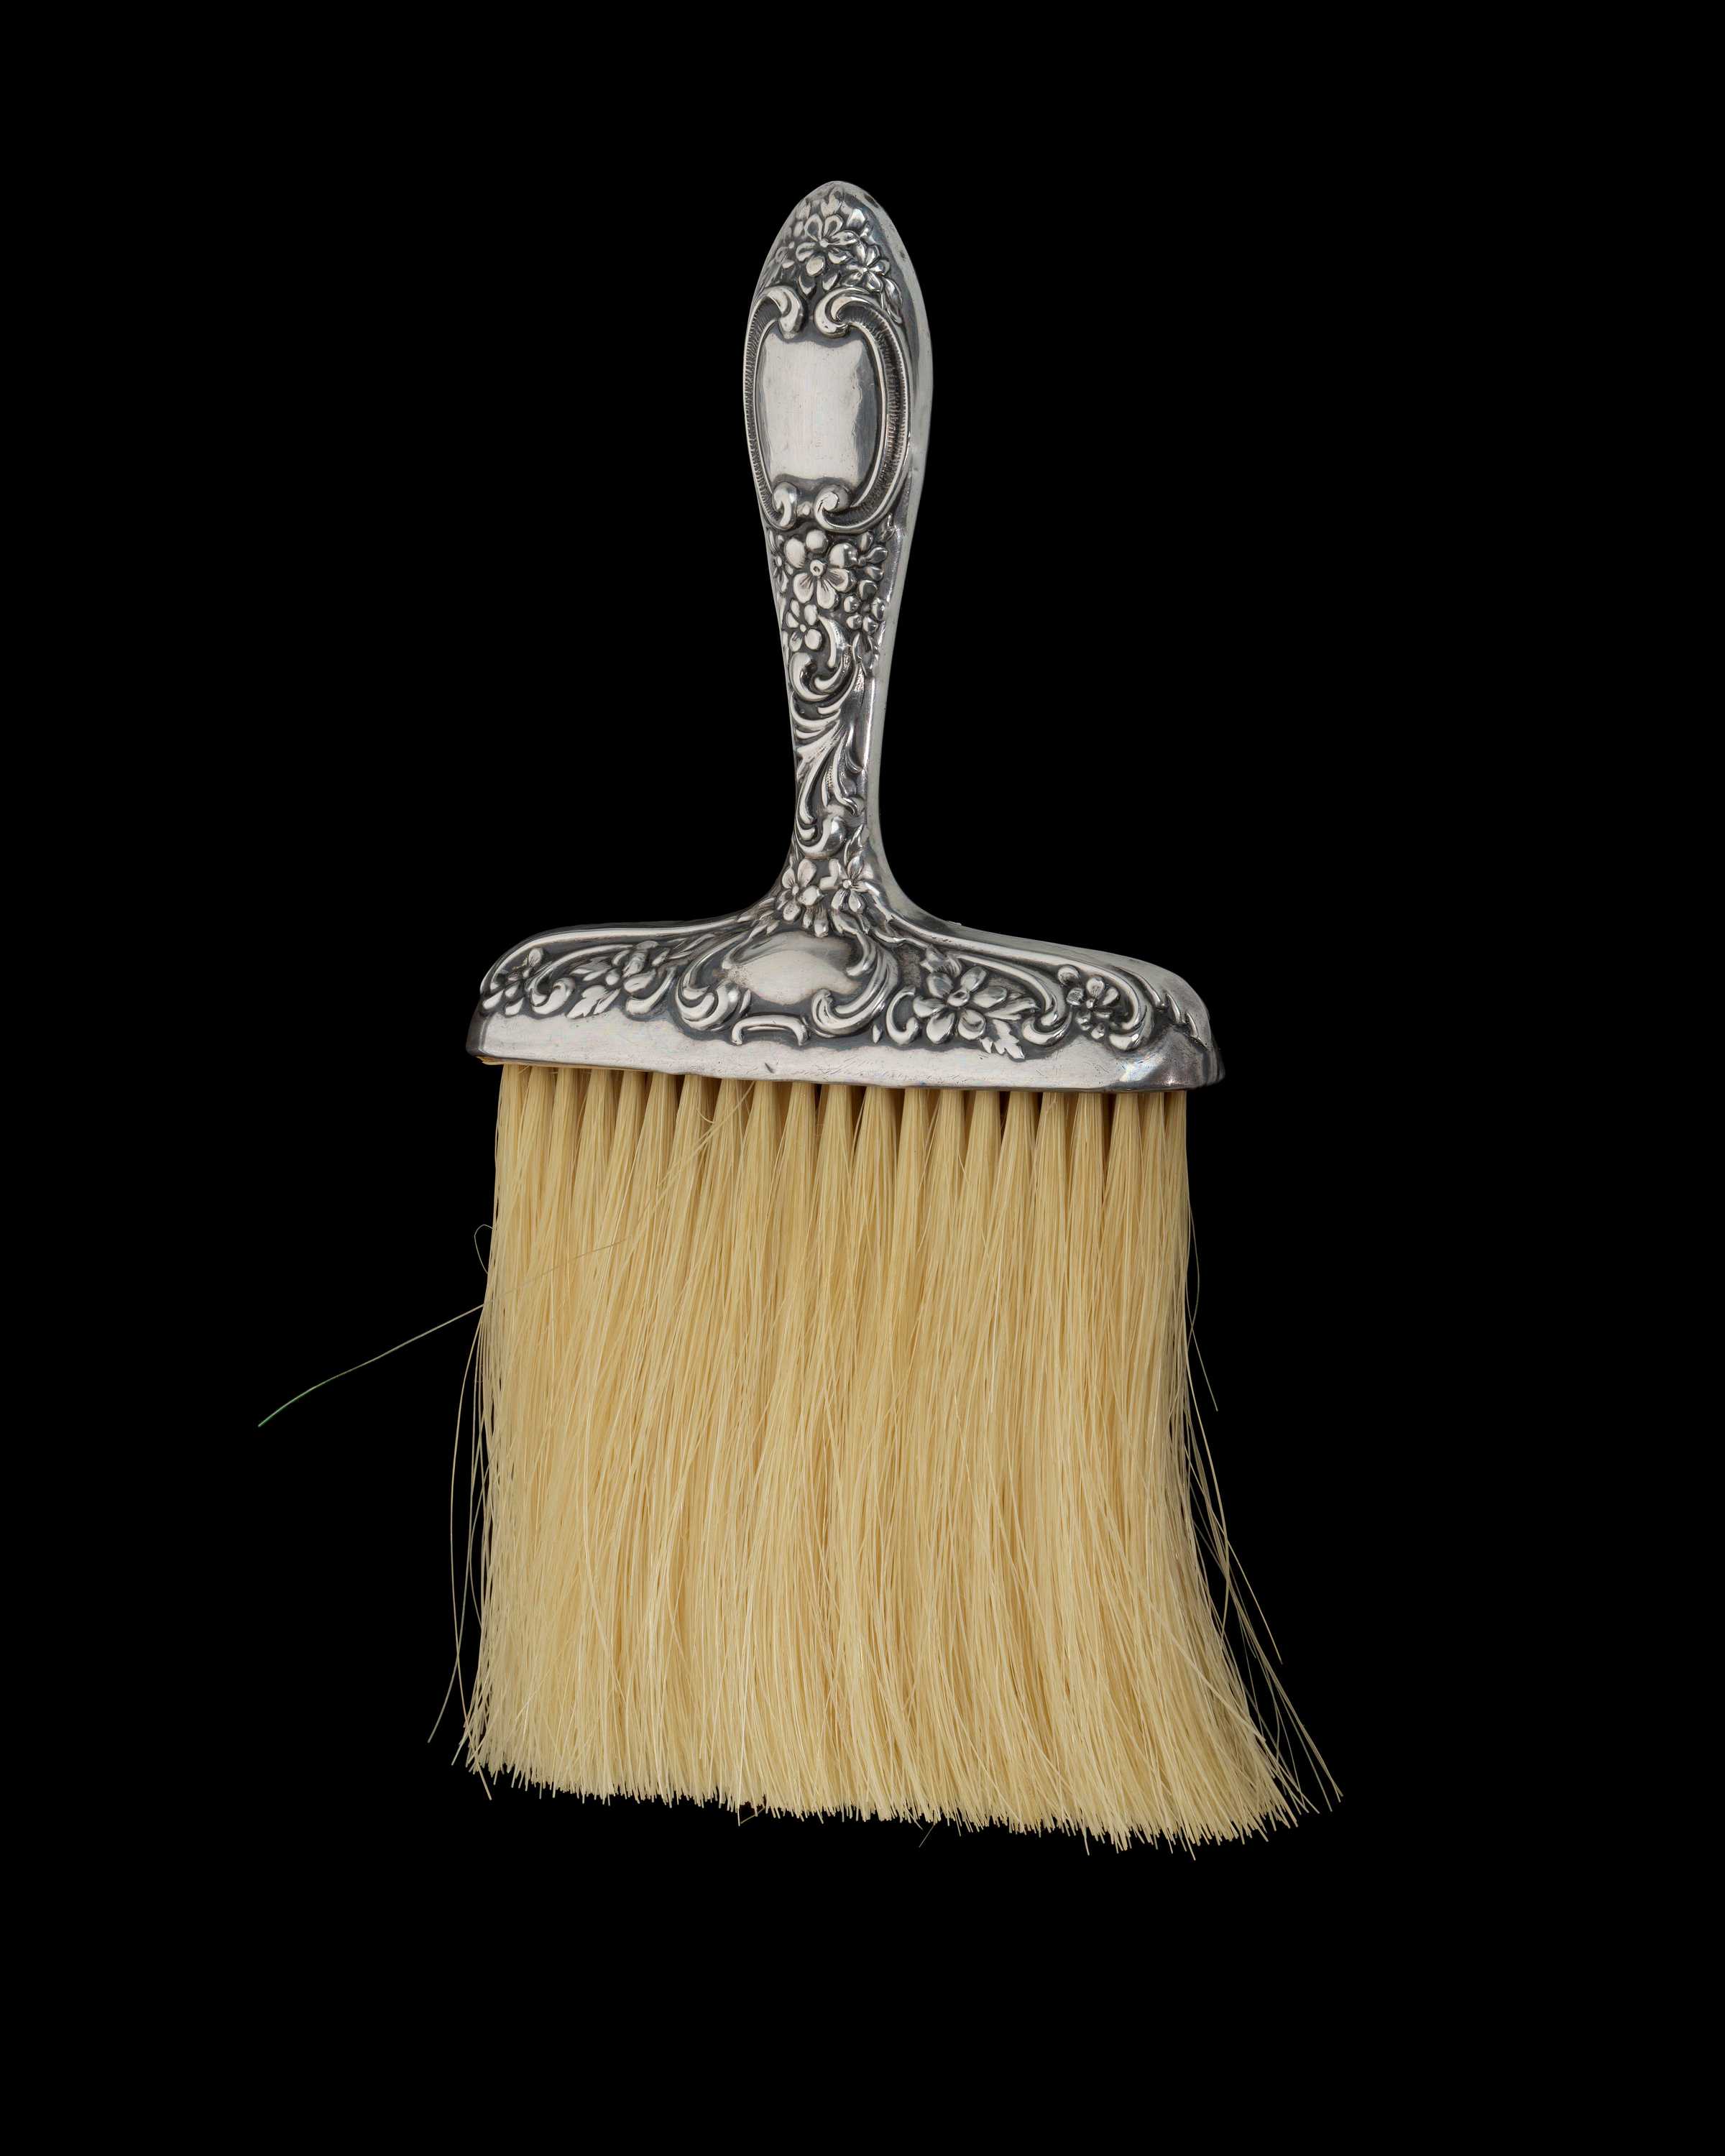 Silver whisk brush with yellow bristles.  The silver handle has decorative scrollwork throughout.